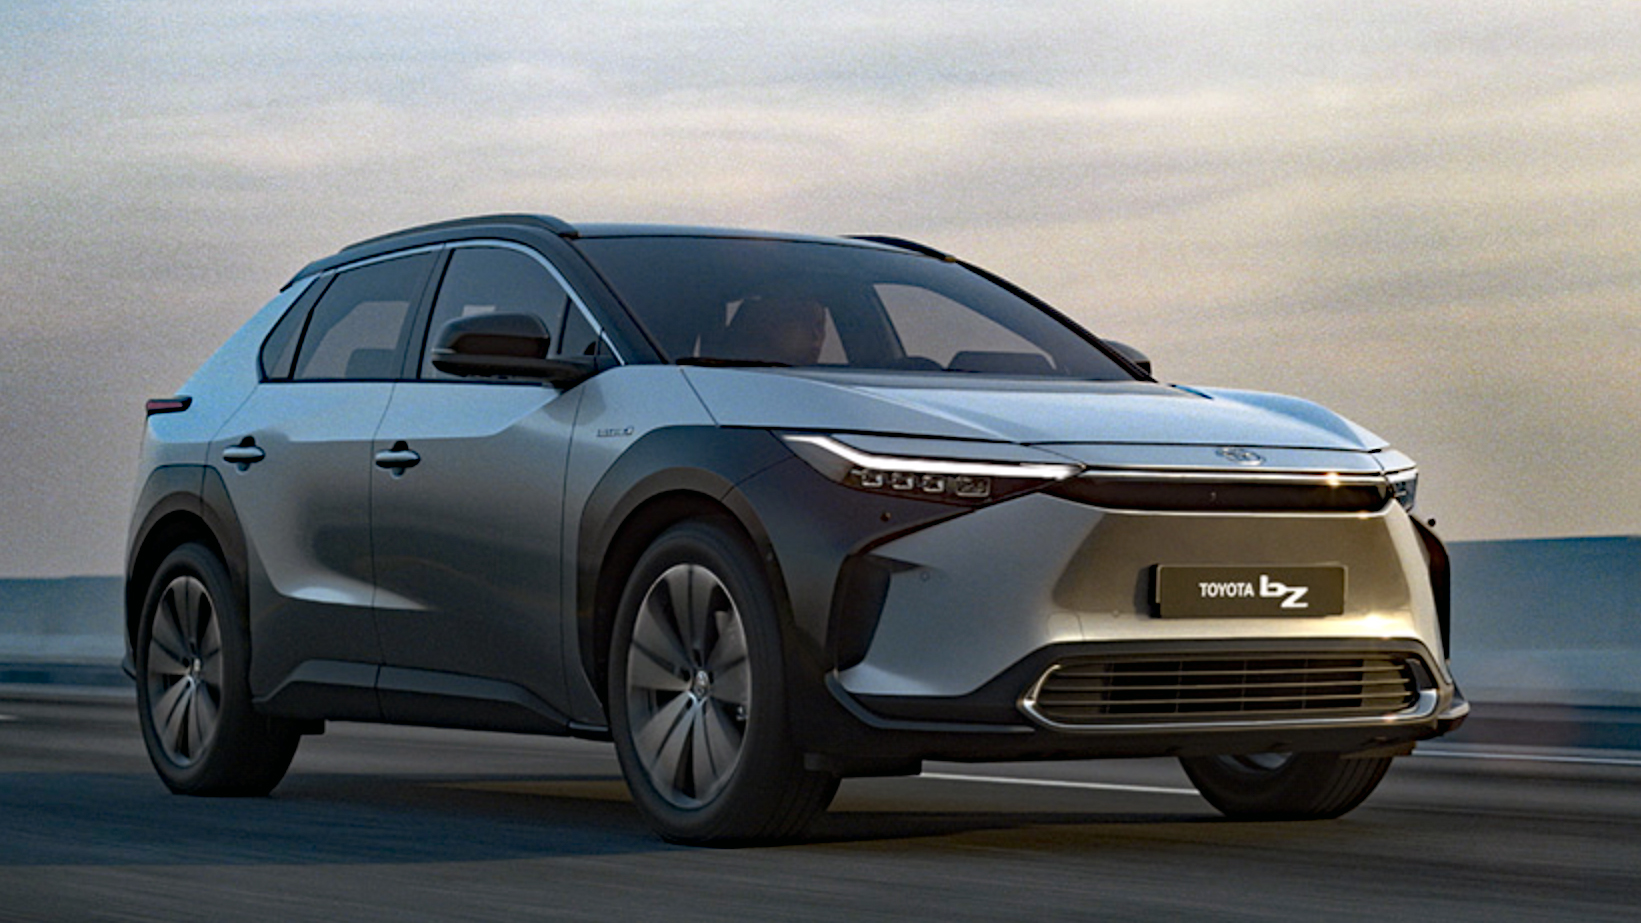 Electric bZ4X Crossover from Toyota - a First Look - The Green Car Guy